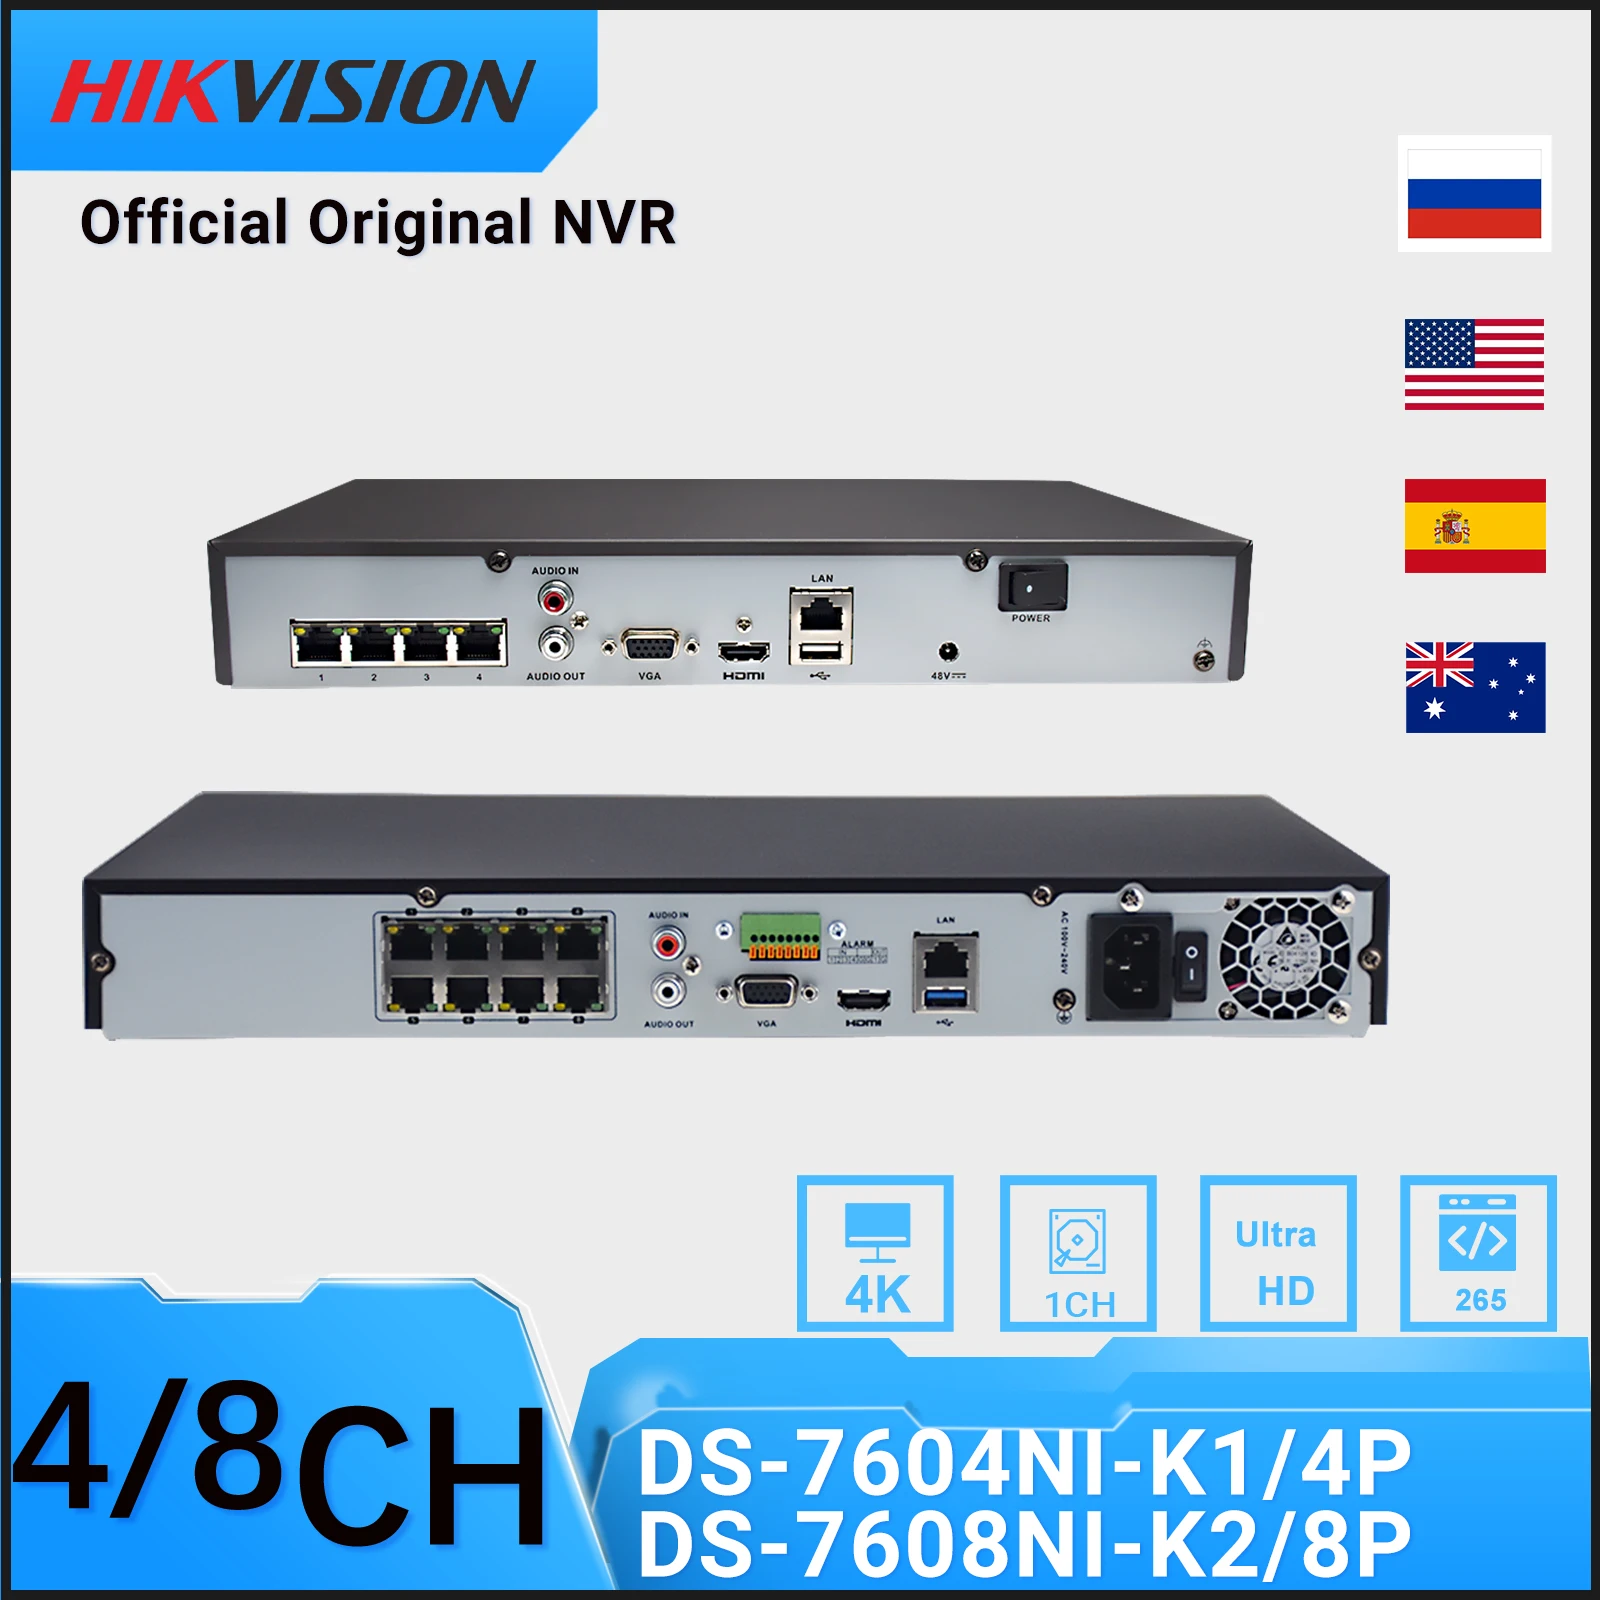 

Hikvision 4CH DS-7604NI-K1/4P 8CH DS-7608NI-K2/8P 4K PoE NVR H.265+ Home Security Protection Surveillance Network Video Recorder